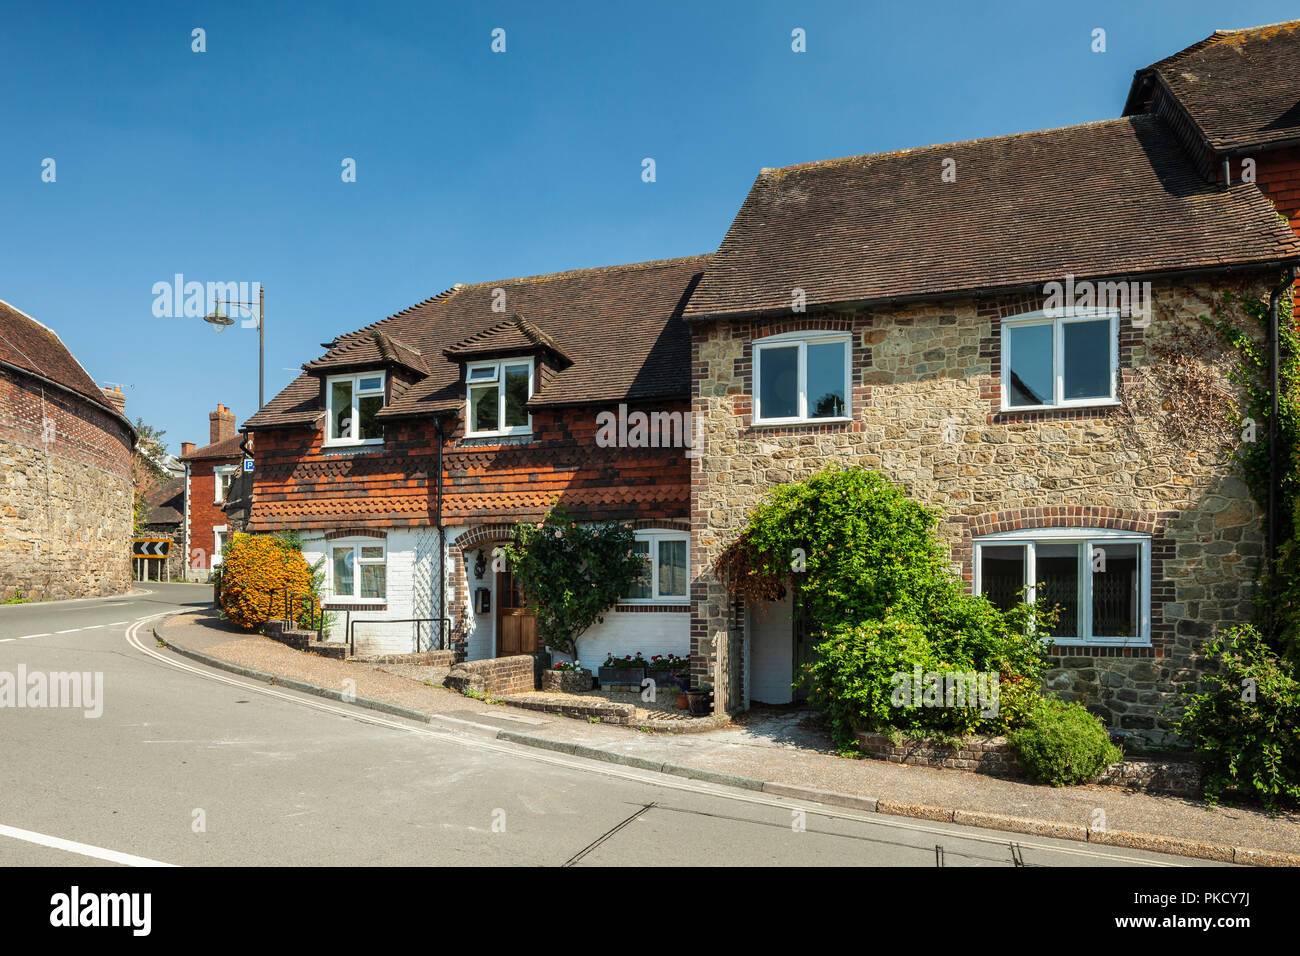 Cottages in Petworth, historic town in West Sussex, England. Stock Photo